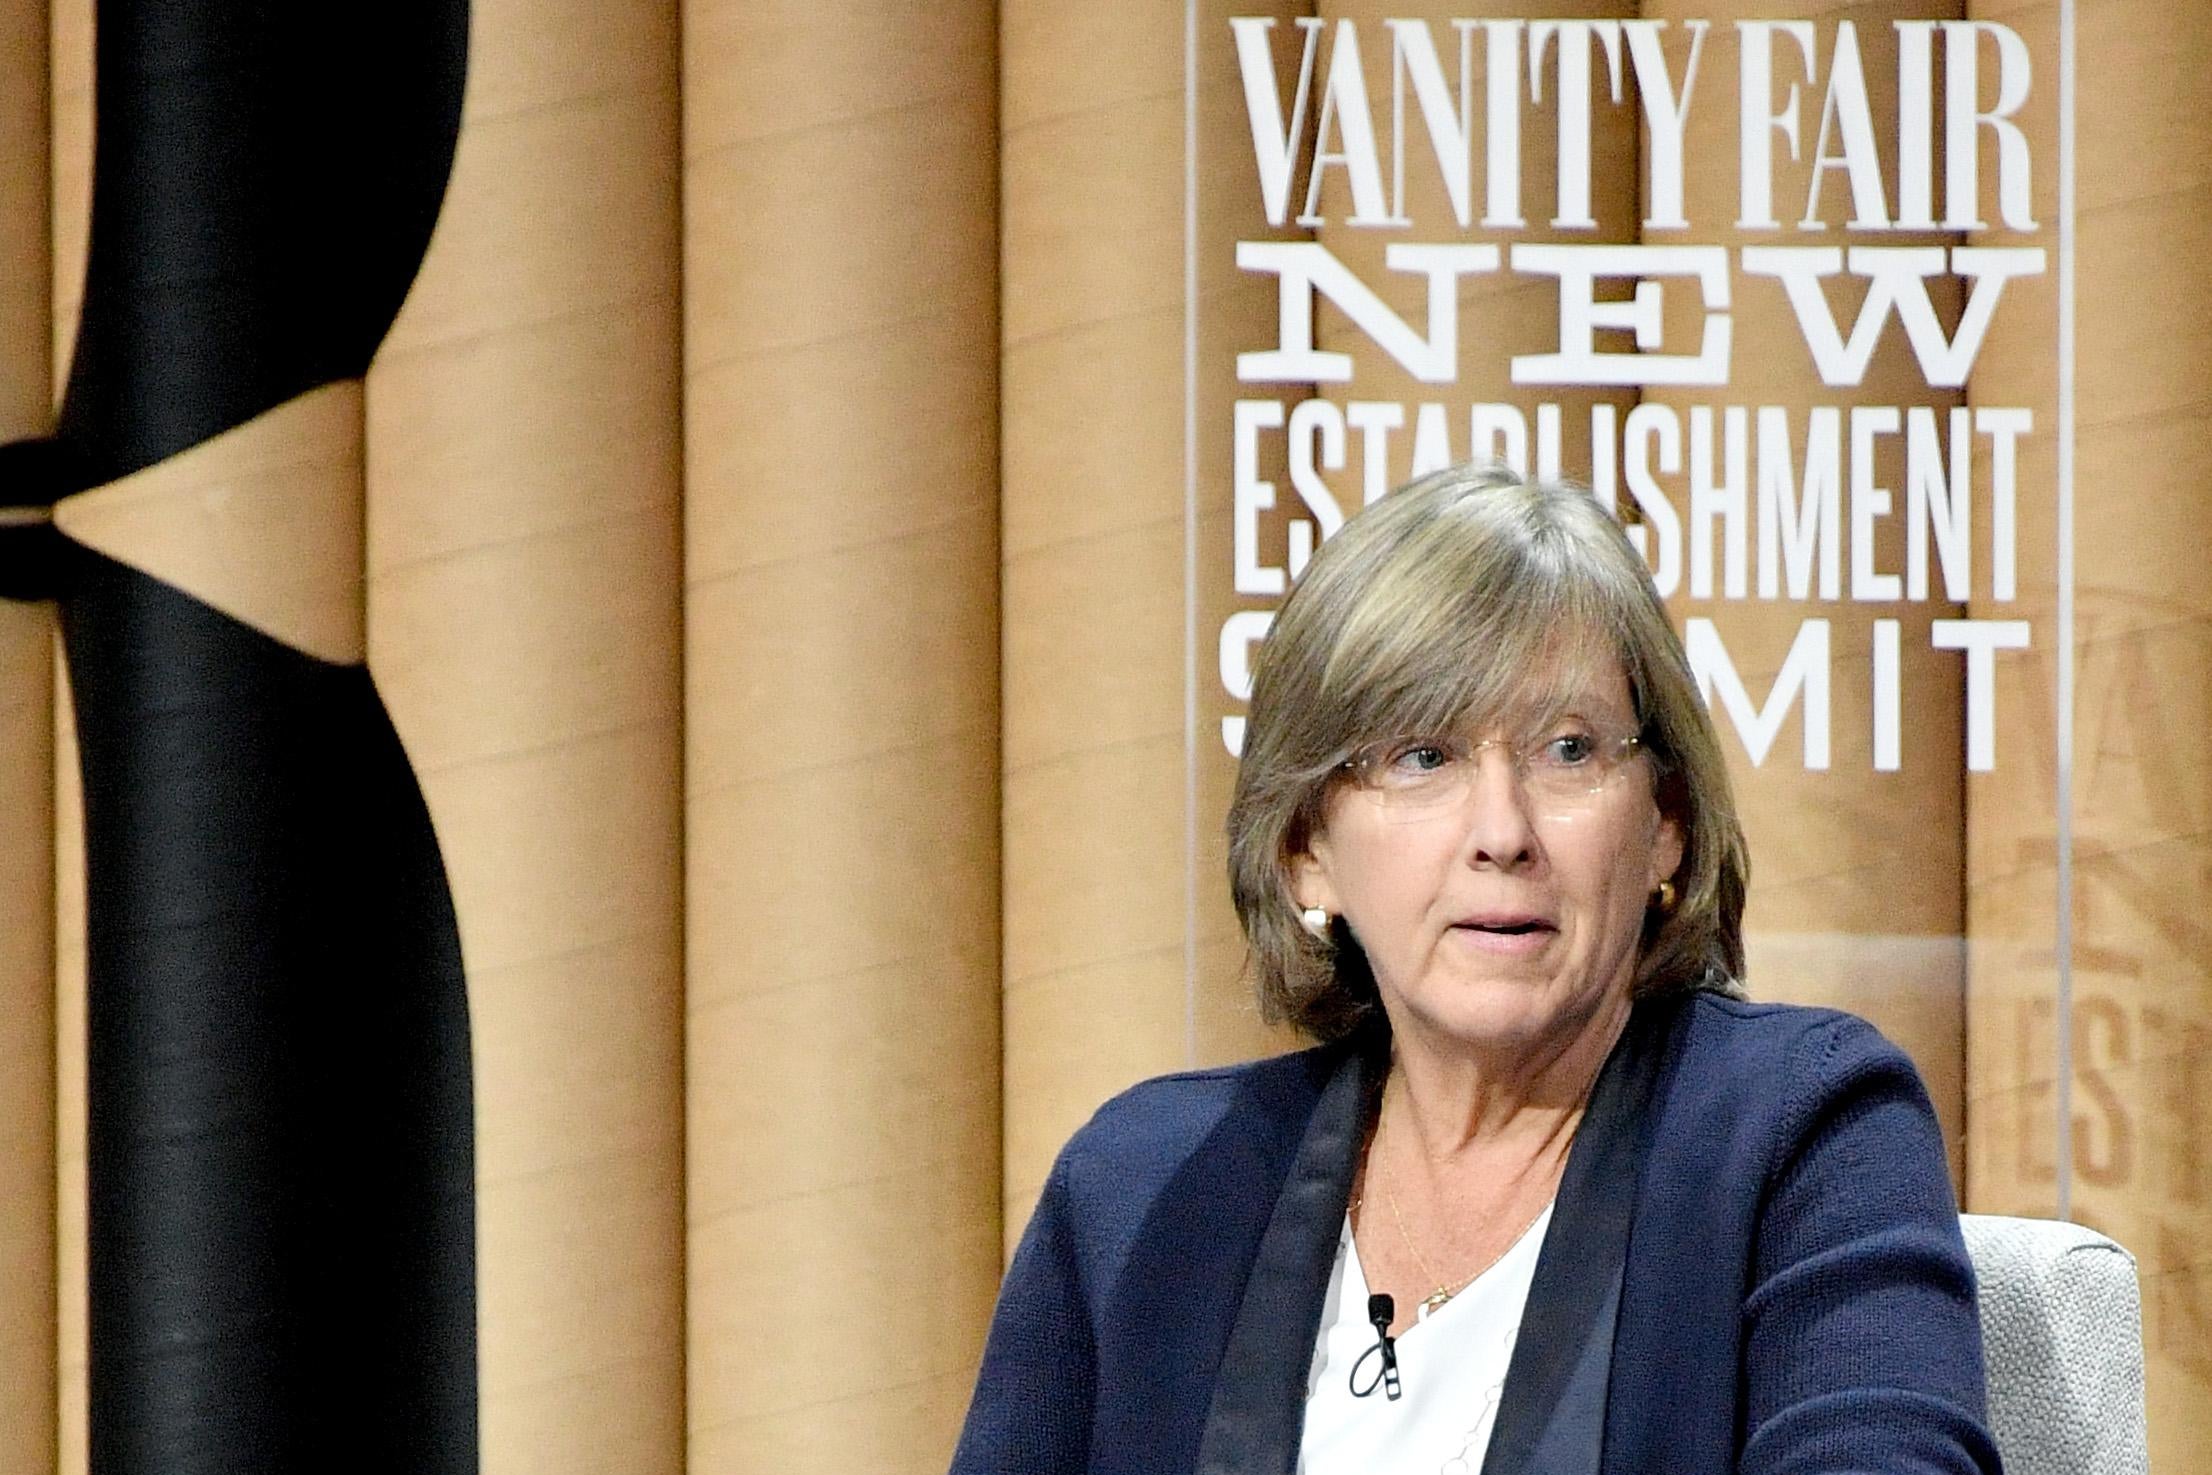 SAN FRANCISCO, CA - OCTOBER 19:  Partner at KPCB, Mary Meeker, speaks onstage during 'The State of the Valley: Where’s the Juice?' at the Vanity Fair New Establishment Summit at Yerba Buena Center for the Arts on October 19, 2016 in San Francisco, California.  (Photo by Mike Windle/Getty Images for Vanity Fair)